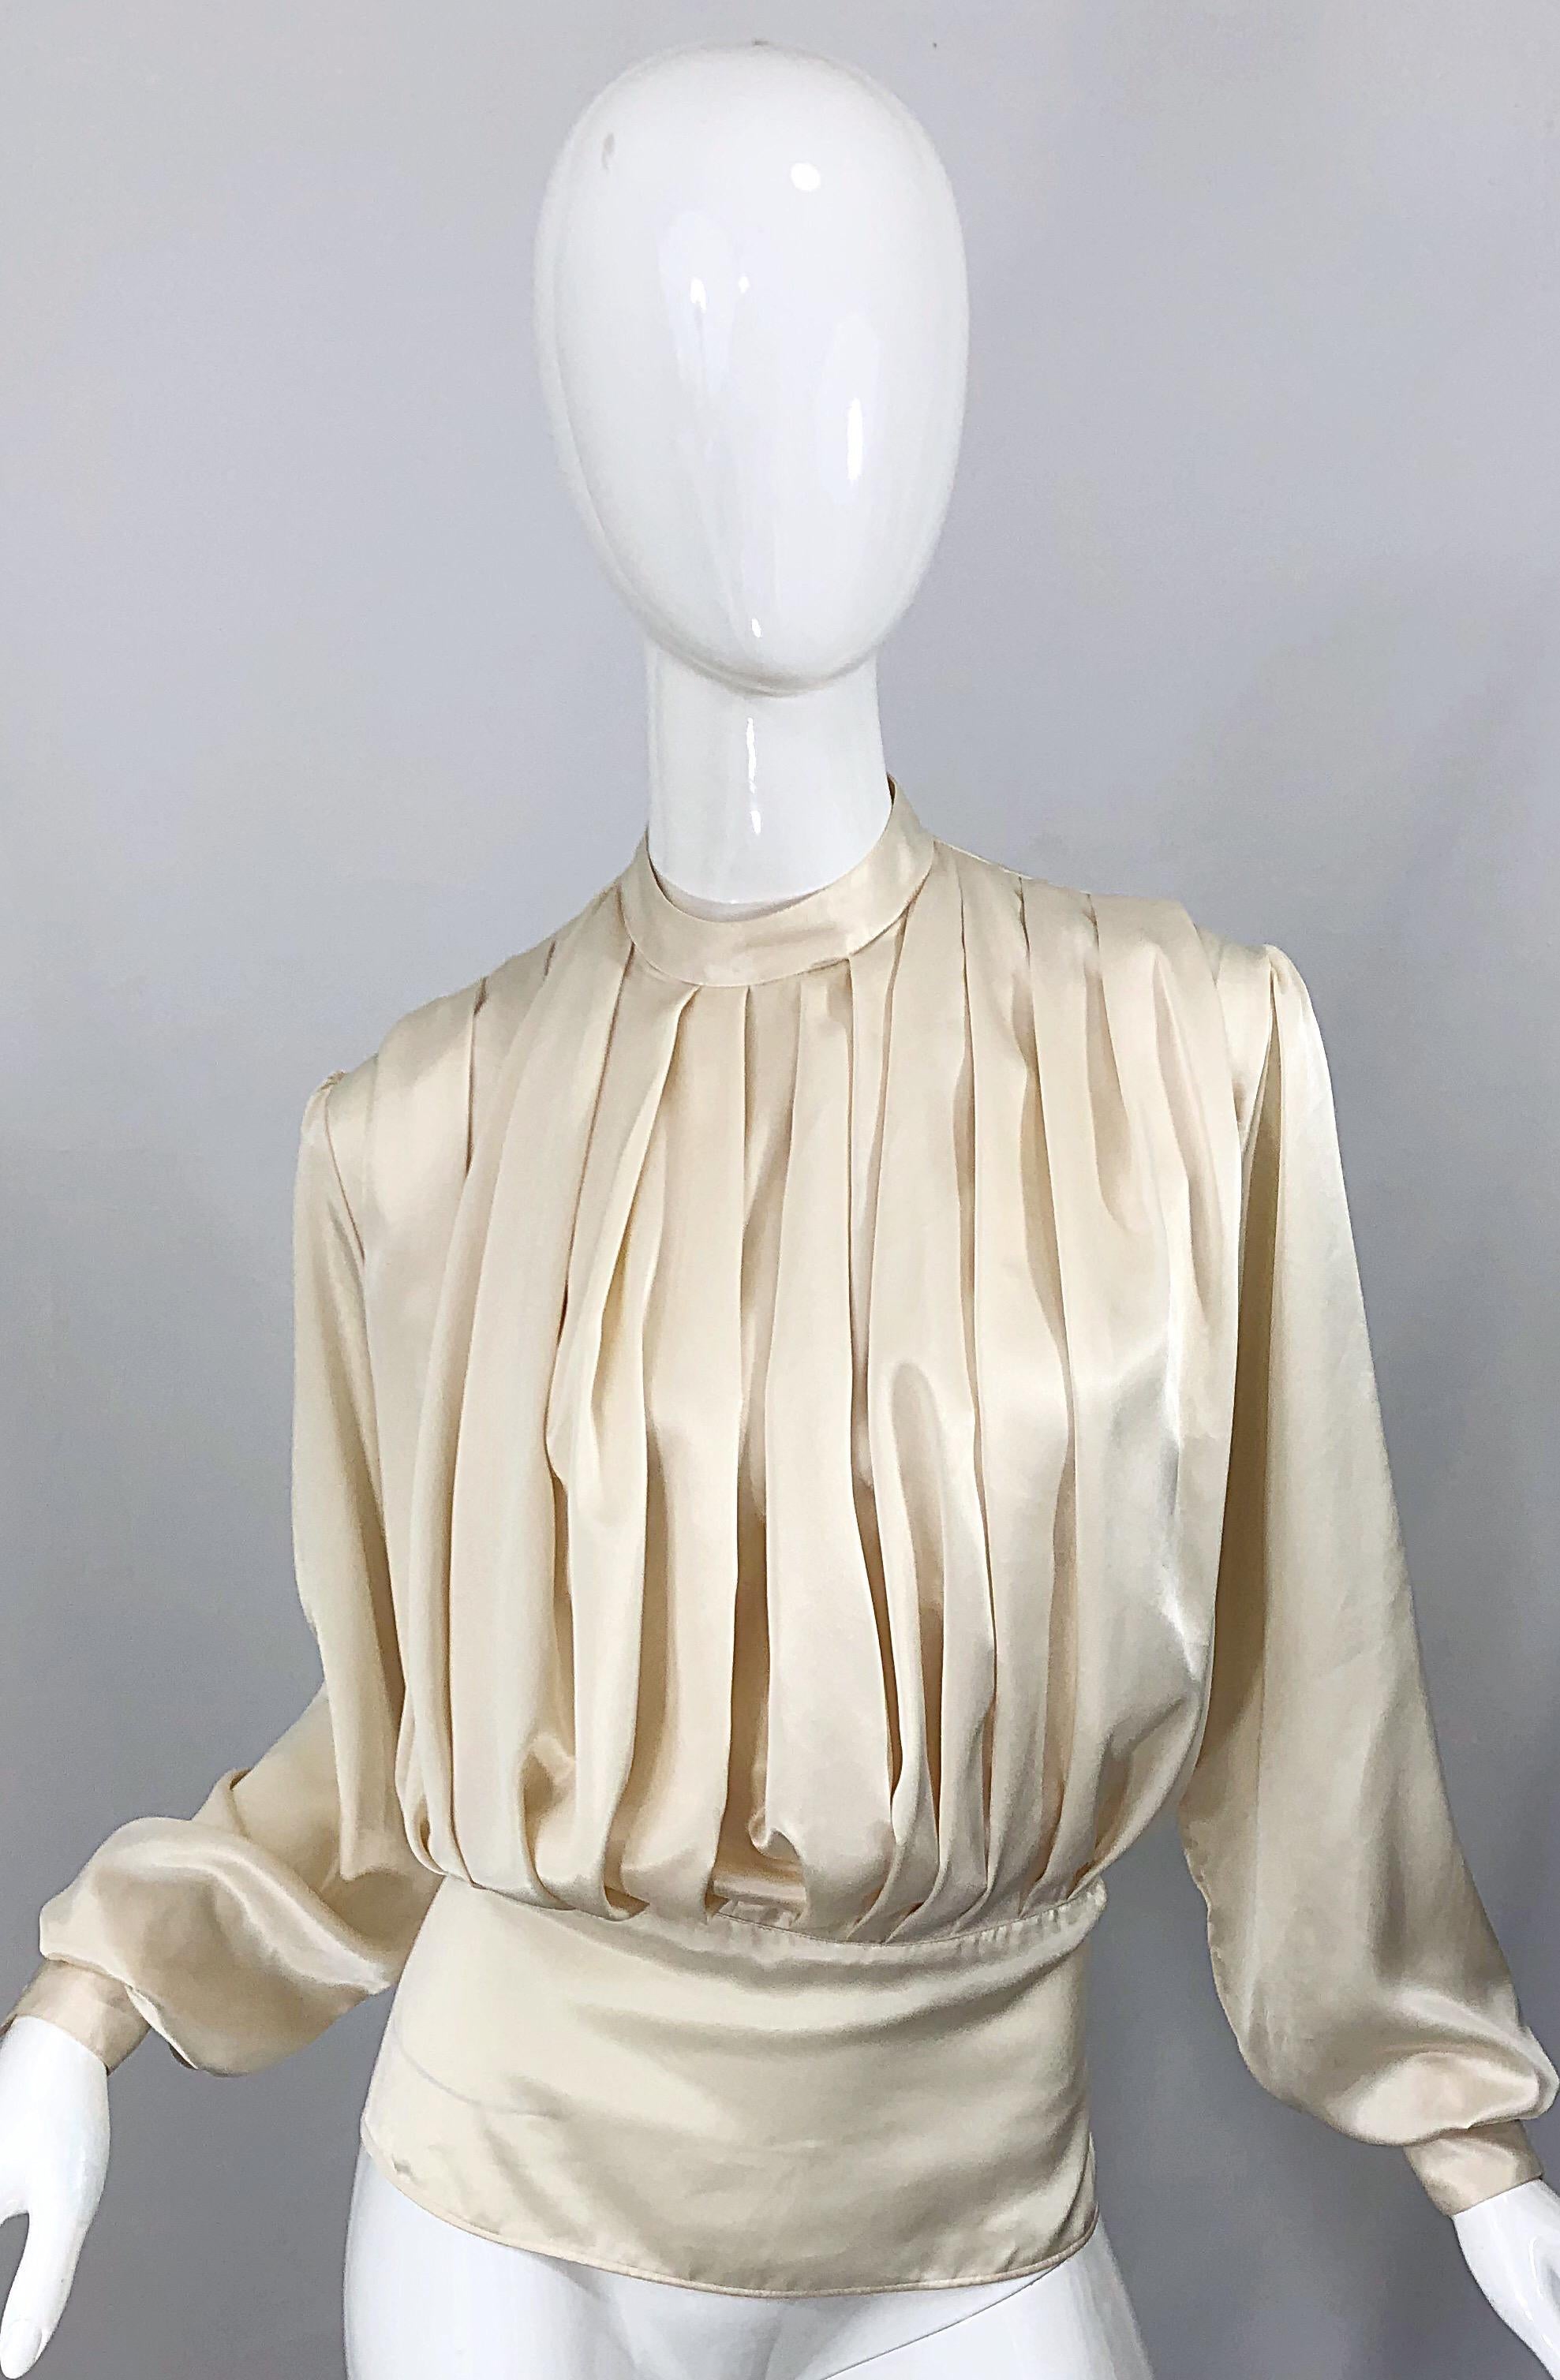 Chic vintage 1990s SONIA RYKIEL ivory / off-white pleated silk blouse! Feature the softest most luxurious silk, with a flattering and forgiving silhouette. Pleats on the front with a high neck. Button closure at top back neck with a peek-a-boo.